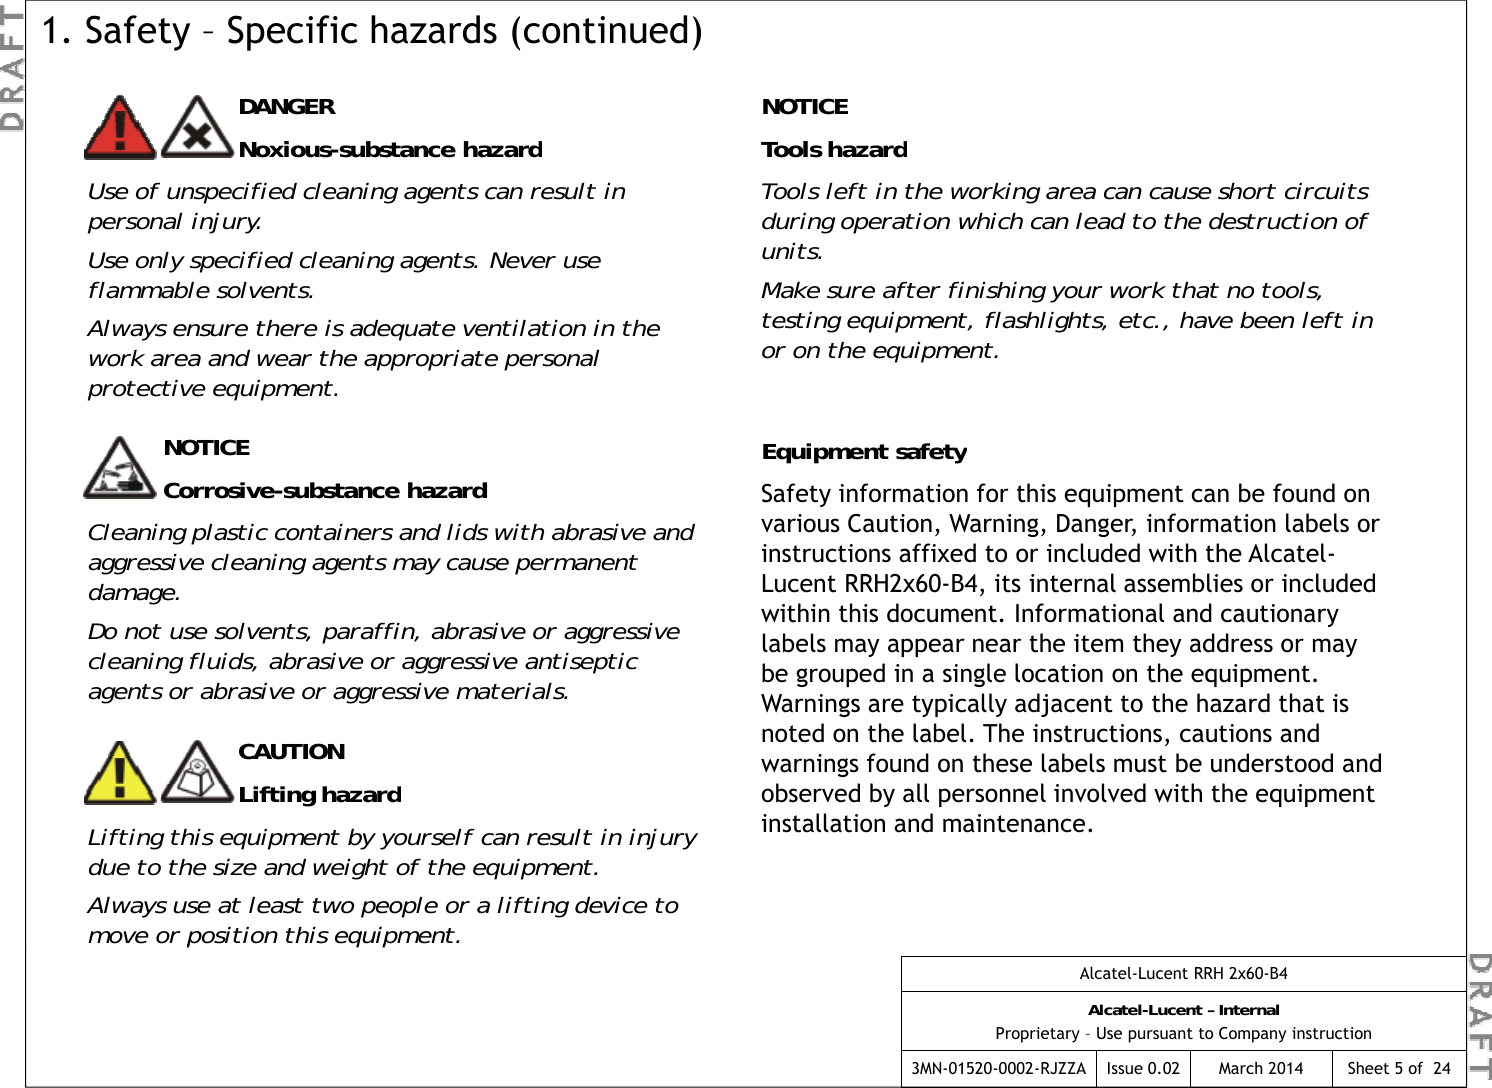 NOTICETl h dDANGERNibt  h d1. Safety – Specific hazards (continued)Tools hazardTools left in the working area can cause short circuits during operation which can lead to the destruction of units.Make sure after finishing your work that no tools, Noxious-substance hazardUse of unspecified cleaning agents can result in personal injury.Use only specified cleaning agents. Never use flammable solvents.ff gytesting equipment, flashlights, etc., have been left in or on the equipment.NOTICE Equipment safetyfAlways ensure there is adequate ventilation in the work area and wear the appropriate personal protective equipment.Corrosive-substance hazardCleaning plastic containers and lids with abrasive and aggressive cleaning agents may cause permanent damage.D  t   l t   ffi  b i    i  qp ySafety information for this equipment can be found on various Caution, Warning, Danger, information labels or instructions affixed to or included with the Alcatel-Lucent RRH2x60-B4, its internal assemblies or included within this document. Informational and cautionary Do not use solvents, paraffin, abrasive or aggressive cleaning fluids, abrasive or aggressive antiseptic agents or abrasive or aggressive materials.ylabels may appear near the item they address or may be grouped in a single location on the equipment. Warnings are typically adjacent to the hazard that is noted on the label. The instructions, cautions and warnings found on these labels must be understood and bdbll lldhhCAUTIONfhdobserved by all personnel involved with the equipment installation and maintenance.Lifting hazardLifting this equipment by yourself can result in injury due to the size and weight of the equipment.Always use at least two people or a lifting device to move or position this equipment.Alcatel-Lucent RRH 2x60-B4Alcatel-Lucent – InternalProprietary – Use pursuant to Company instruction3MN-01520-0002-RJZZA Issue 0.02 March 2014 Sheet 5 of  24pqp